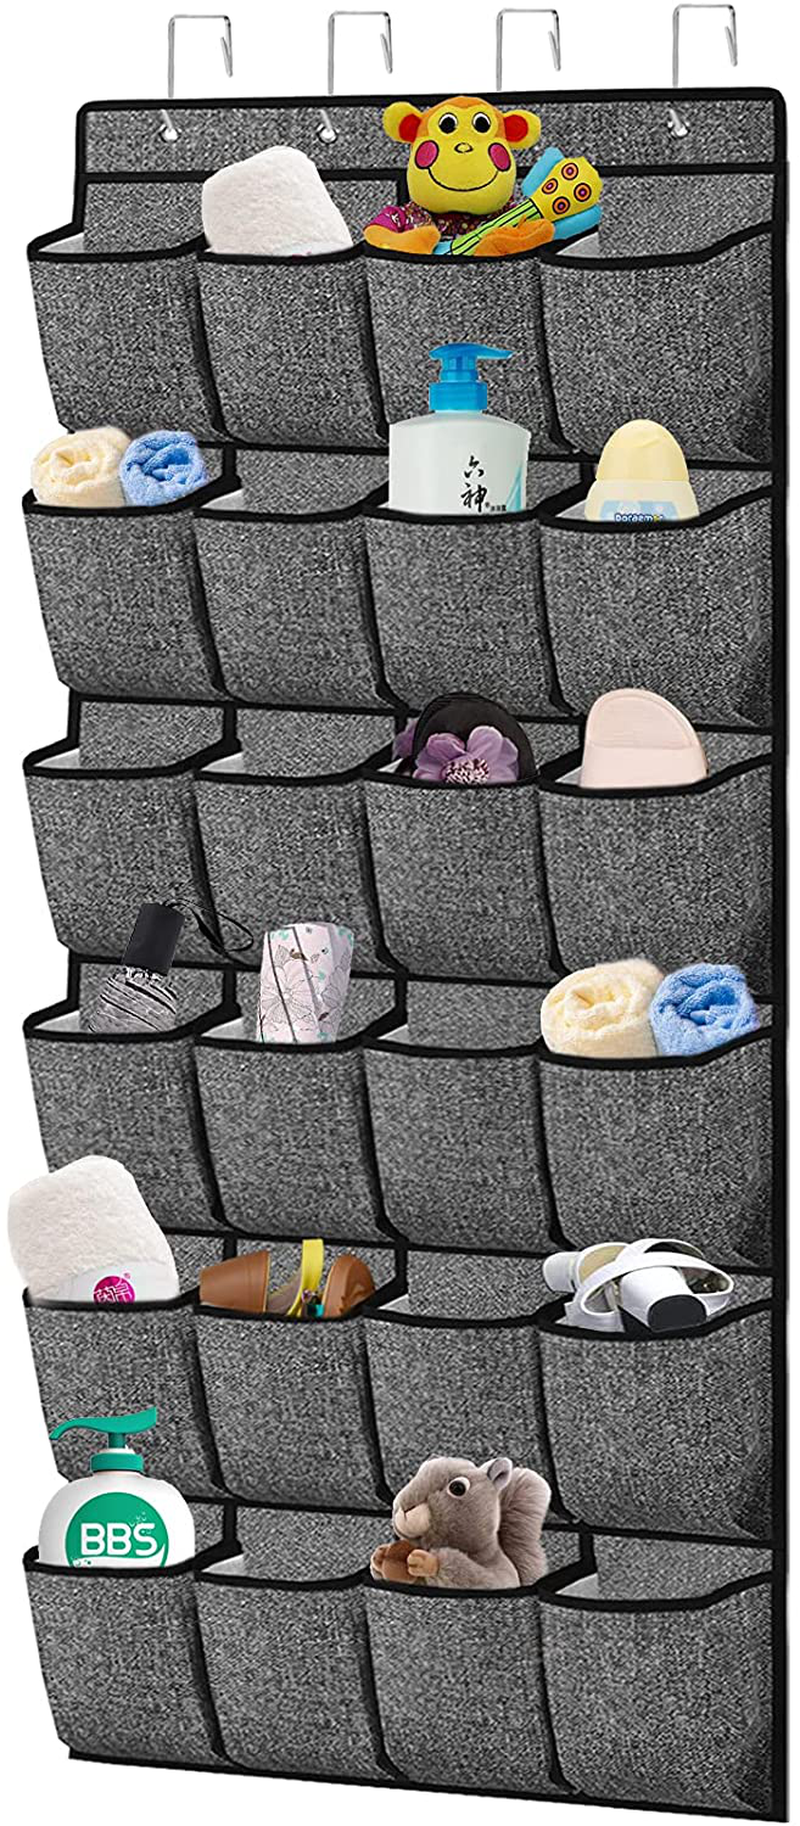 Over the Door Shoe Organizer,Hanging Shoe Rack Holder with 24 Extra Large Fabric Pockets for Storage Men Sneakers,Women High Heeled Shoes(White)